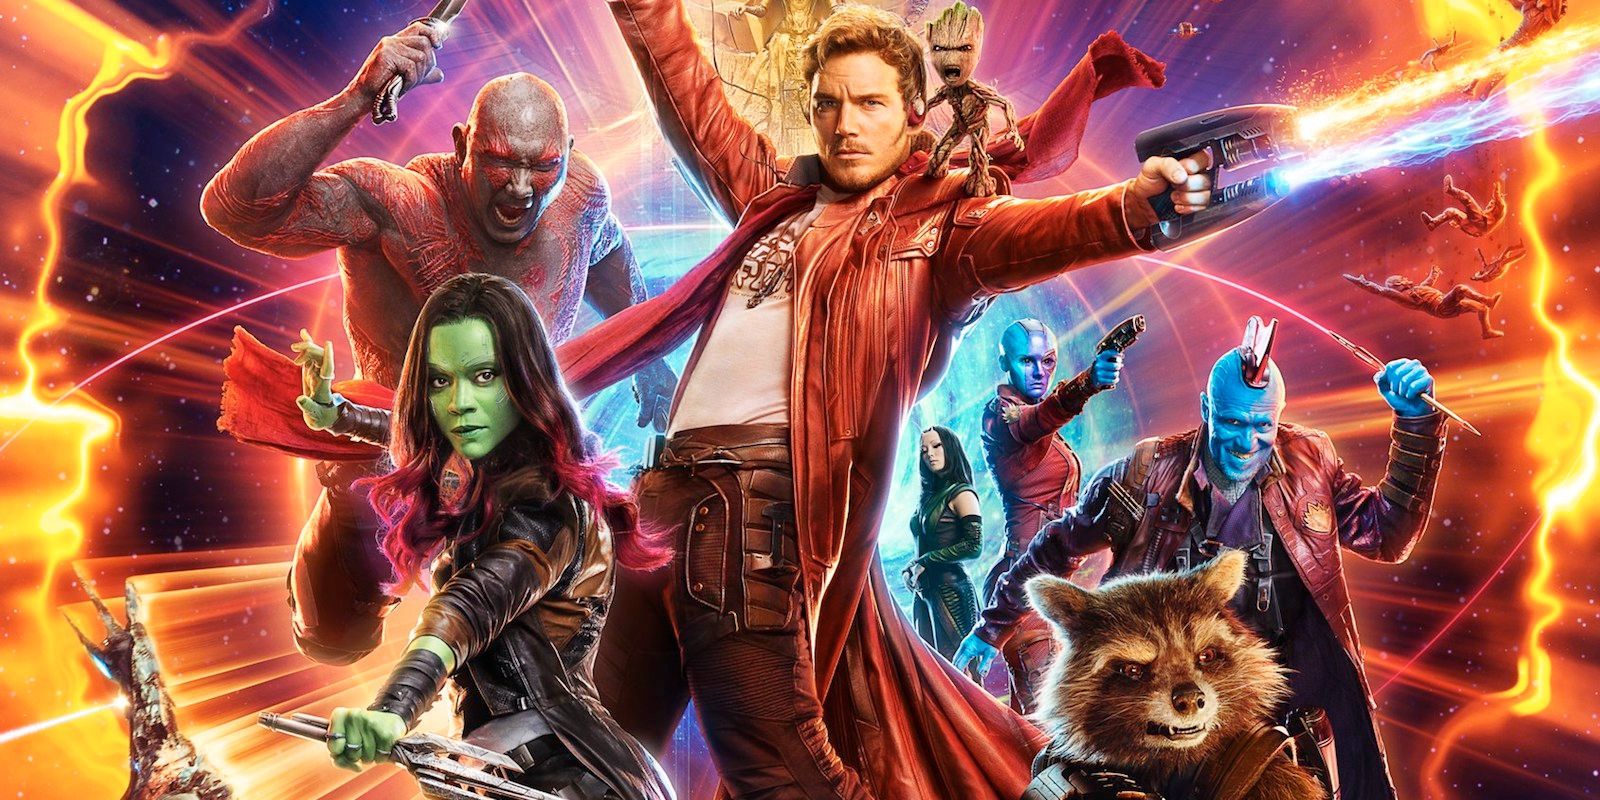 Guardians of the Galaxy 2: Every Character Has An Arc